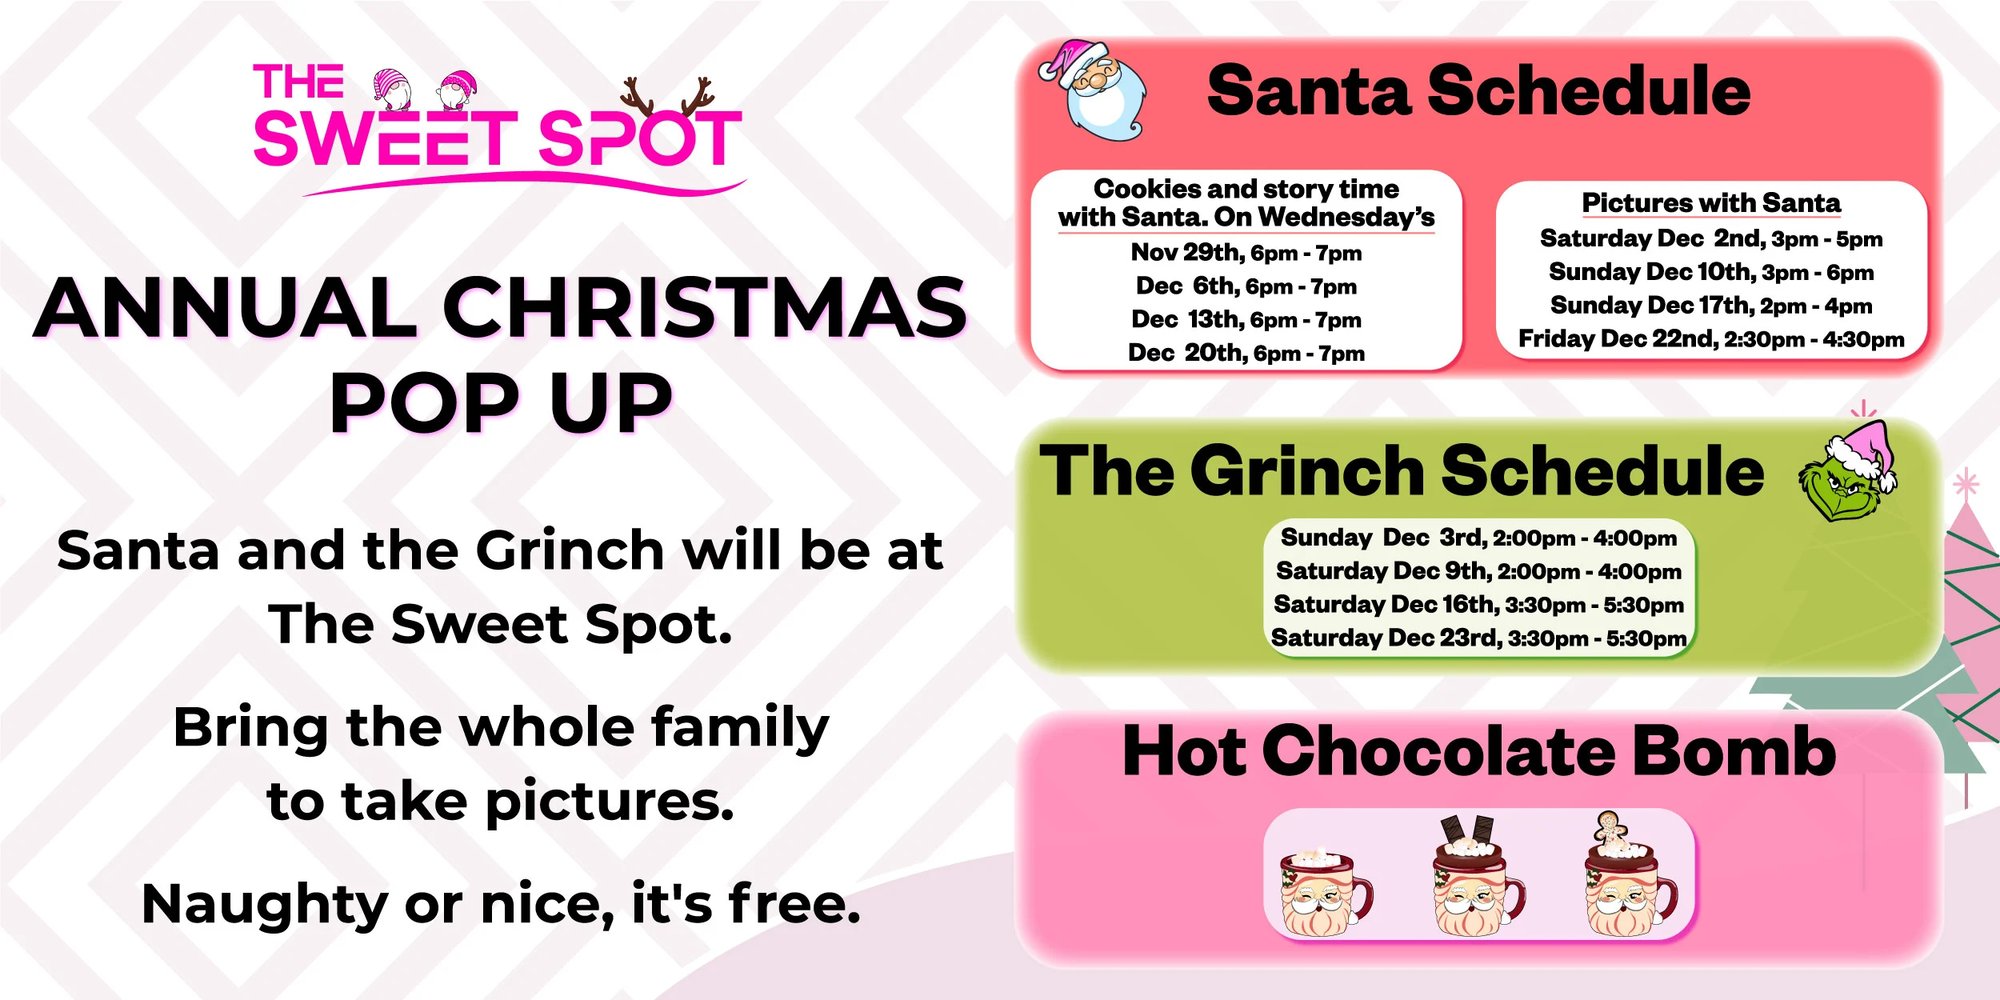 The sweet spot. The Grinch and Santa schedule.